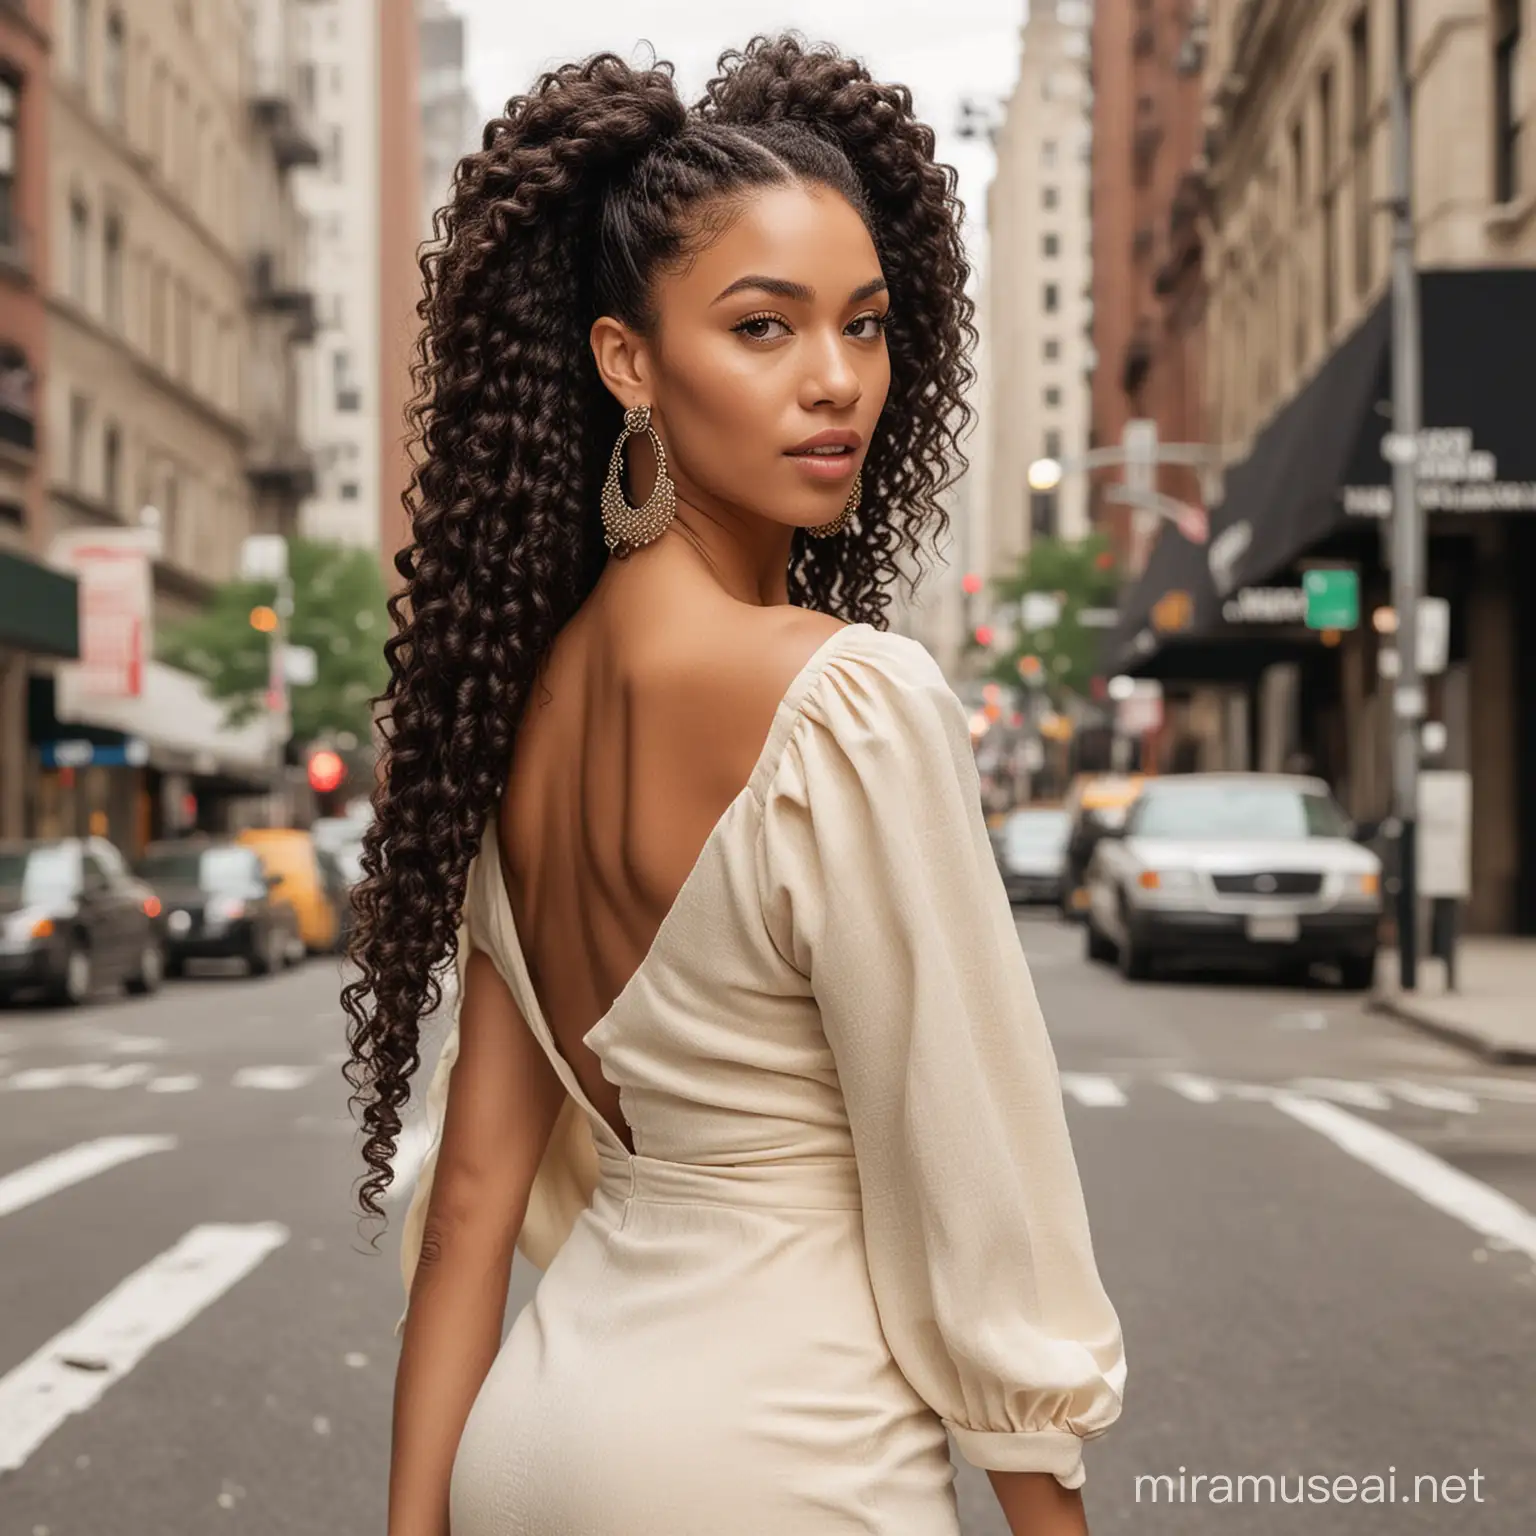 A real women model mixed race, long hair with a huge braid back hair, afro style professional photoshoot modelling small earrings, using a Channel´s brand dress elegant cream colors, front photoshoot looking the at camera, with NewYork street at background, medium shoot